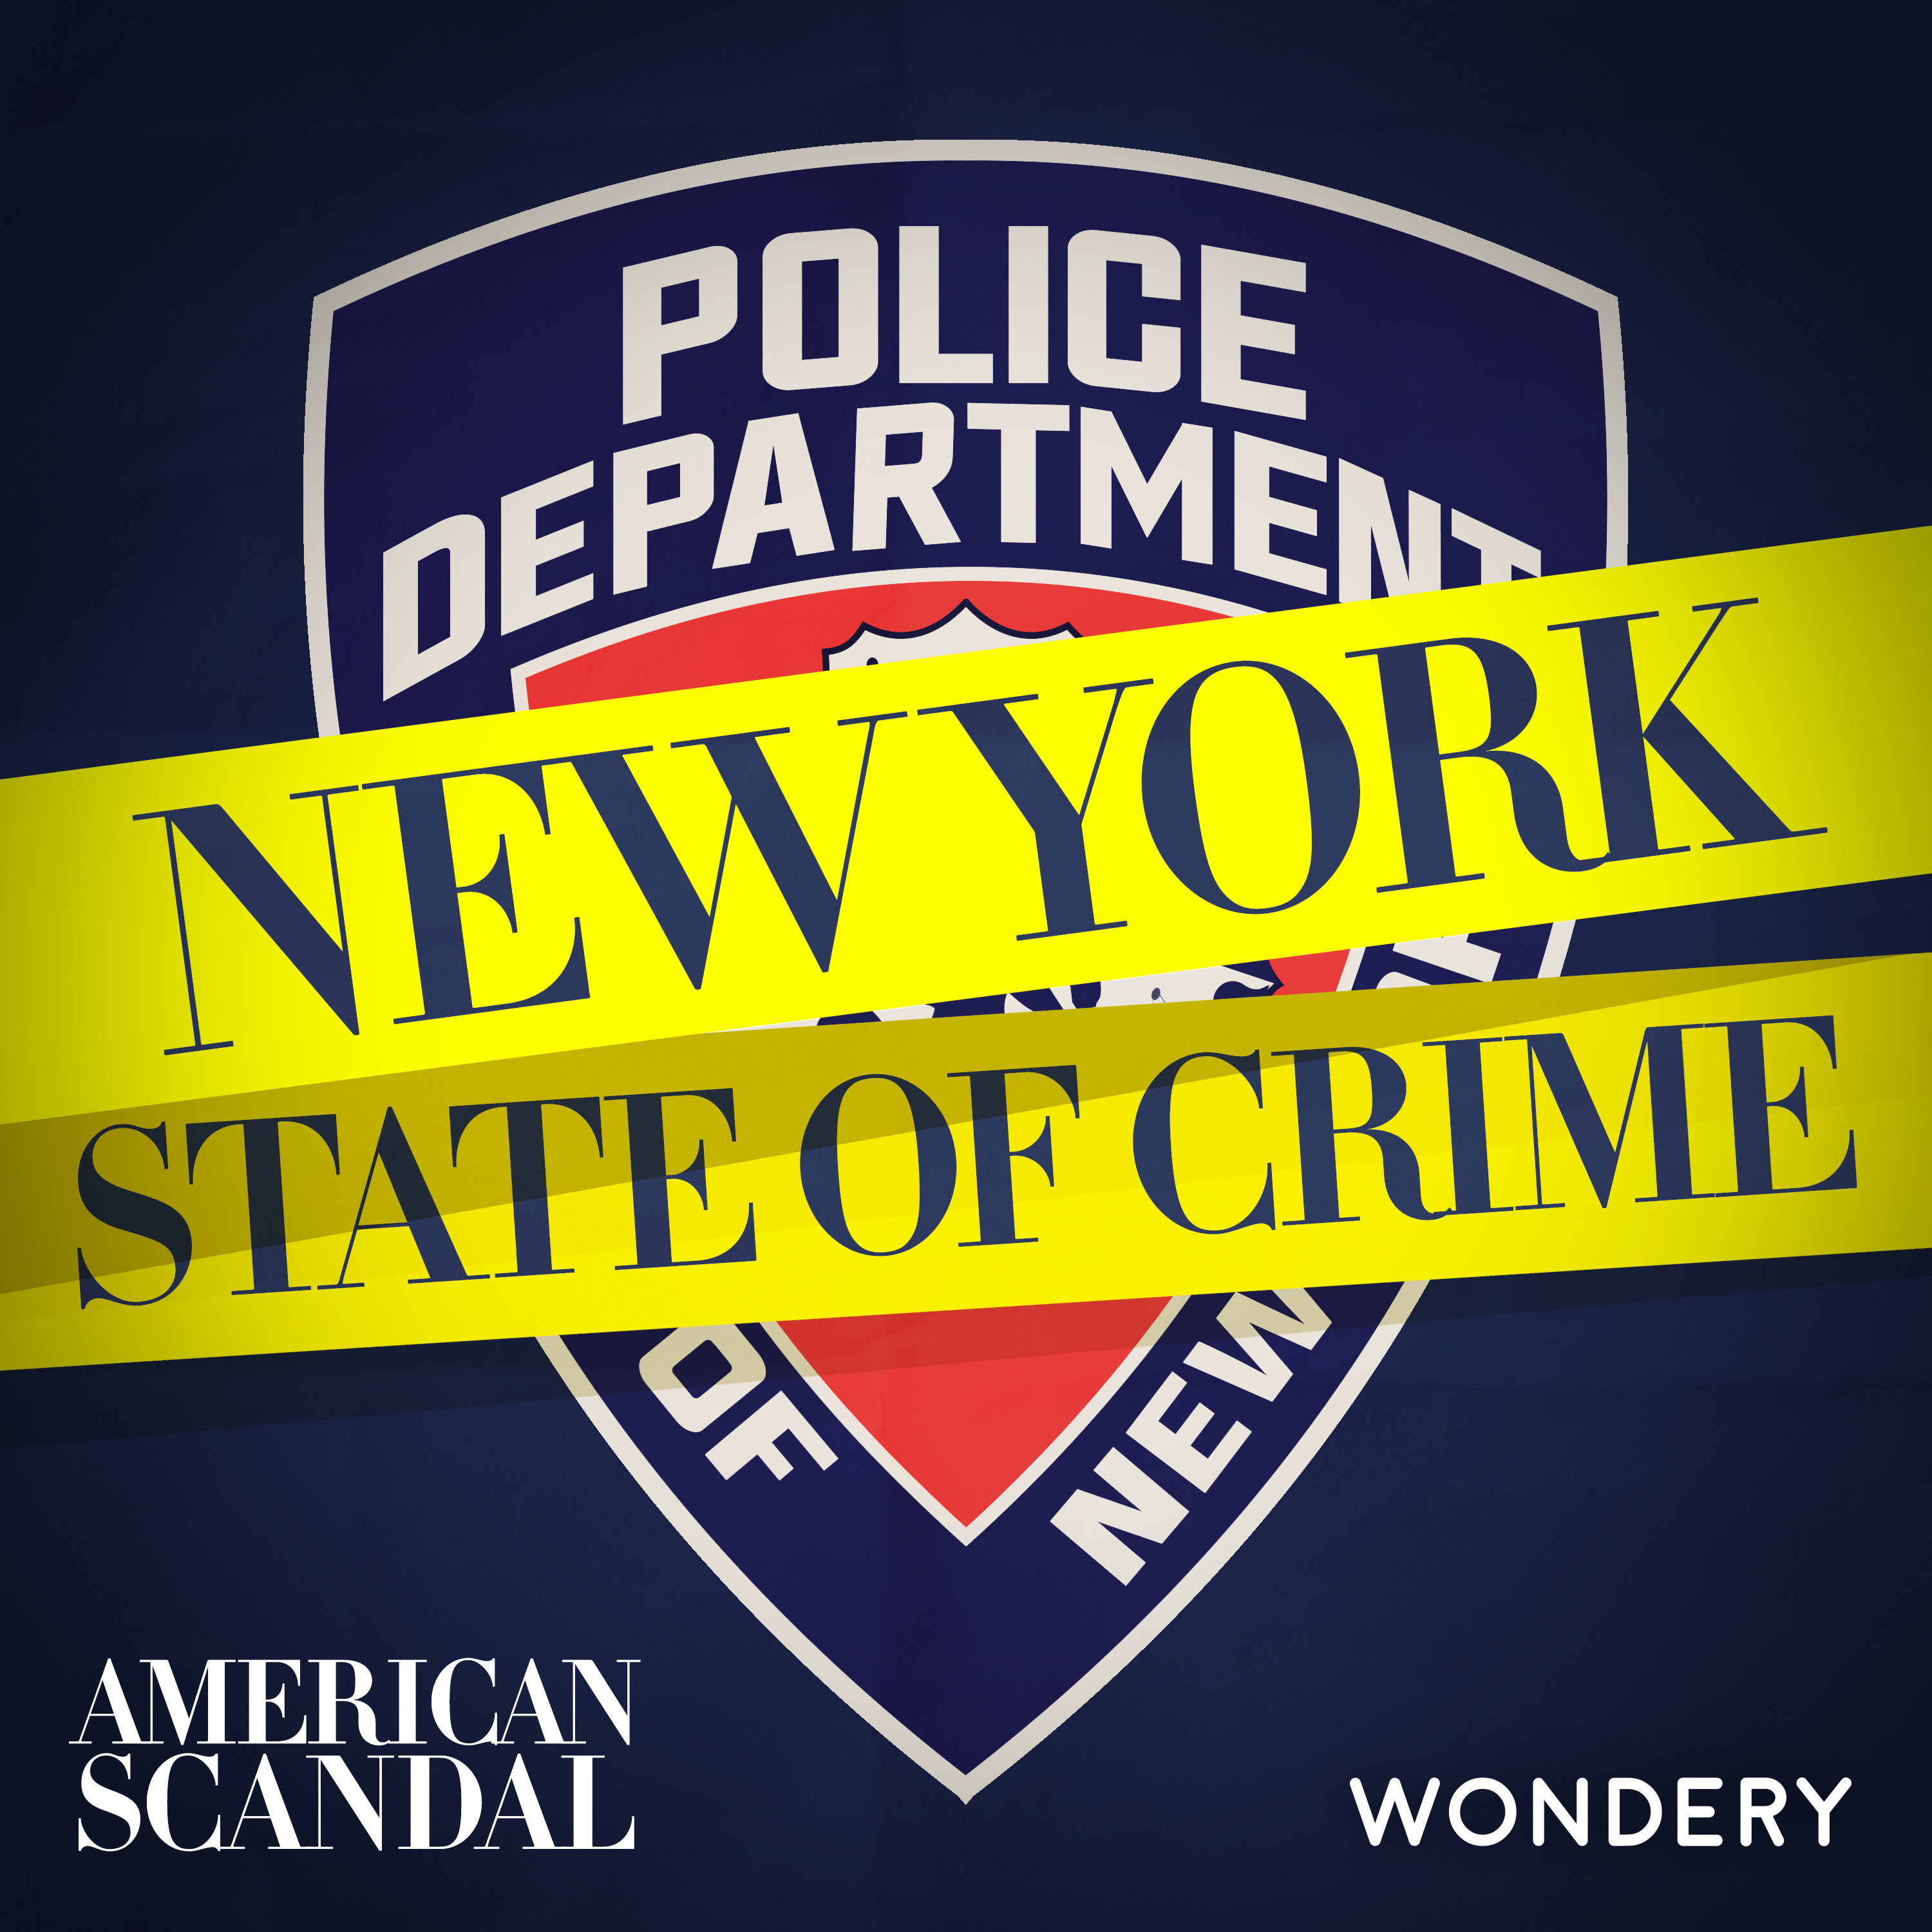 New York State of Crime: Two Men in a Cell | 4